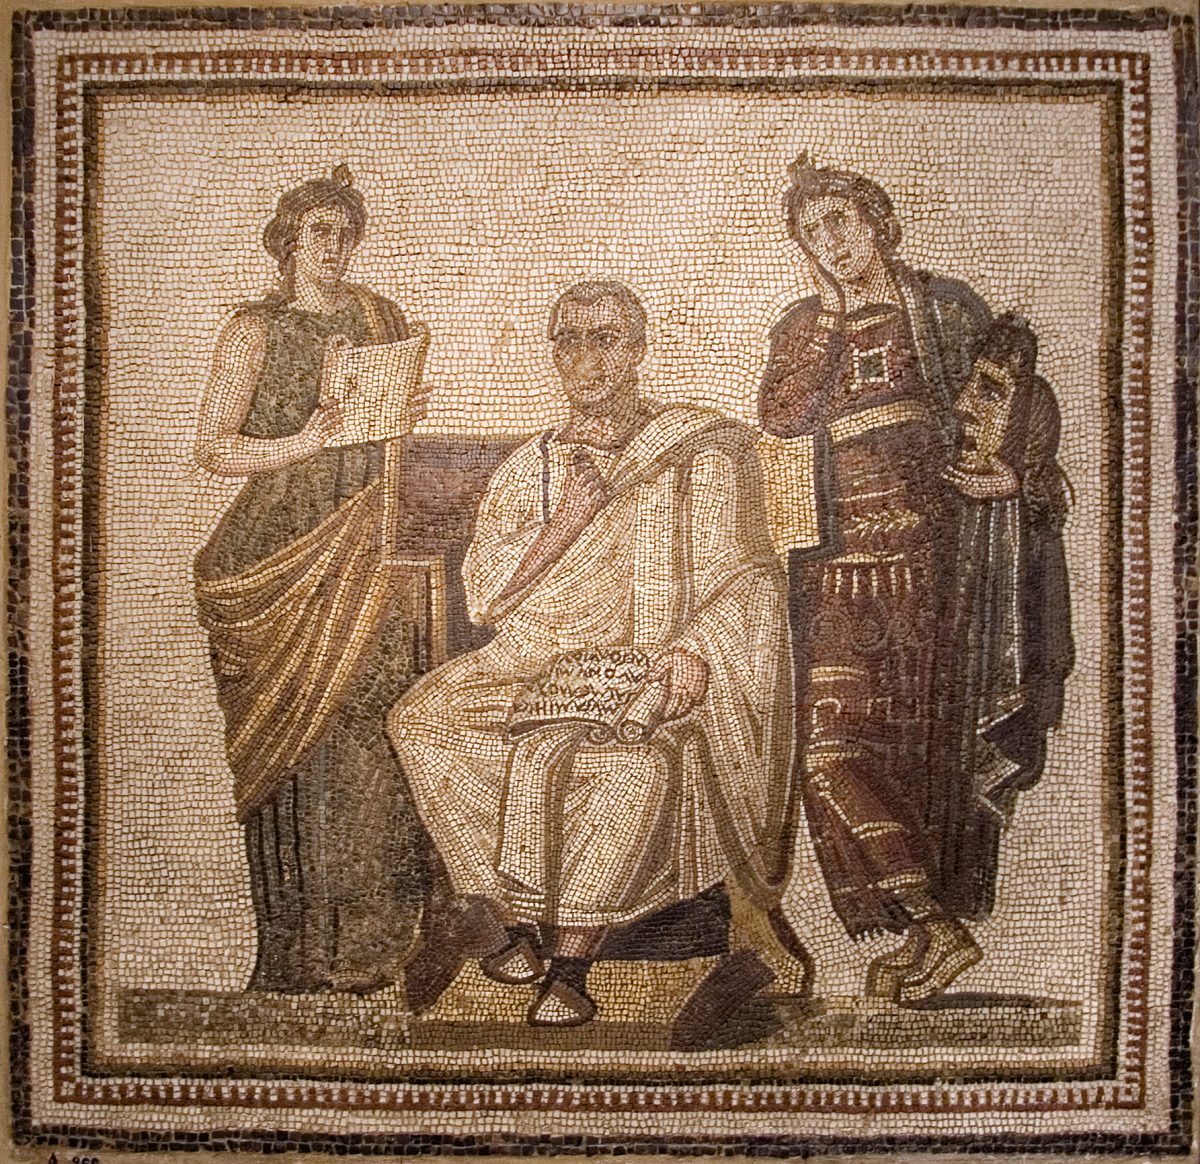 The great Latin poet Virgil, holding the “Aenid” and flanked by the two muses: "Clio" (history) and "Melpomene" (tragedy). The 3rd century A.D. mosaic was discovered in Sousse, Tunisia. Bardo Museum in Tunis, Tunisia. (Public Domain)